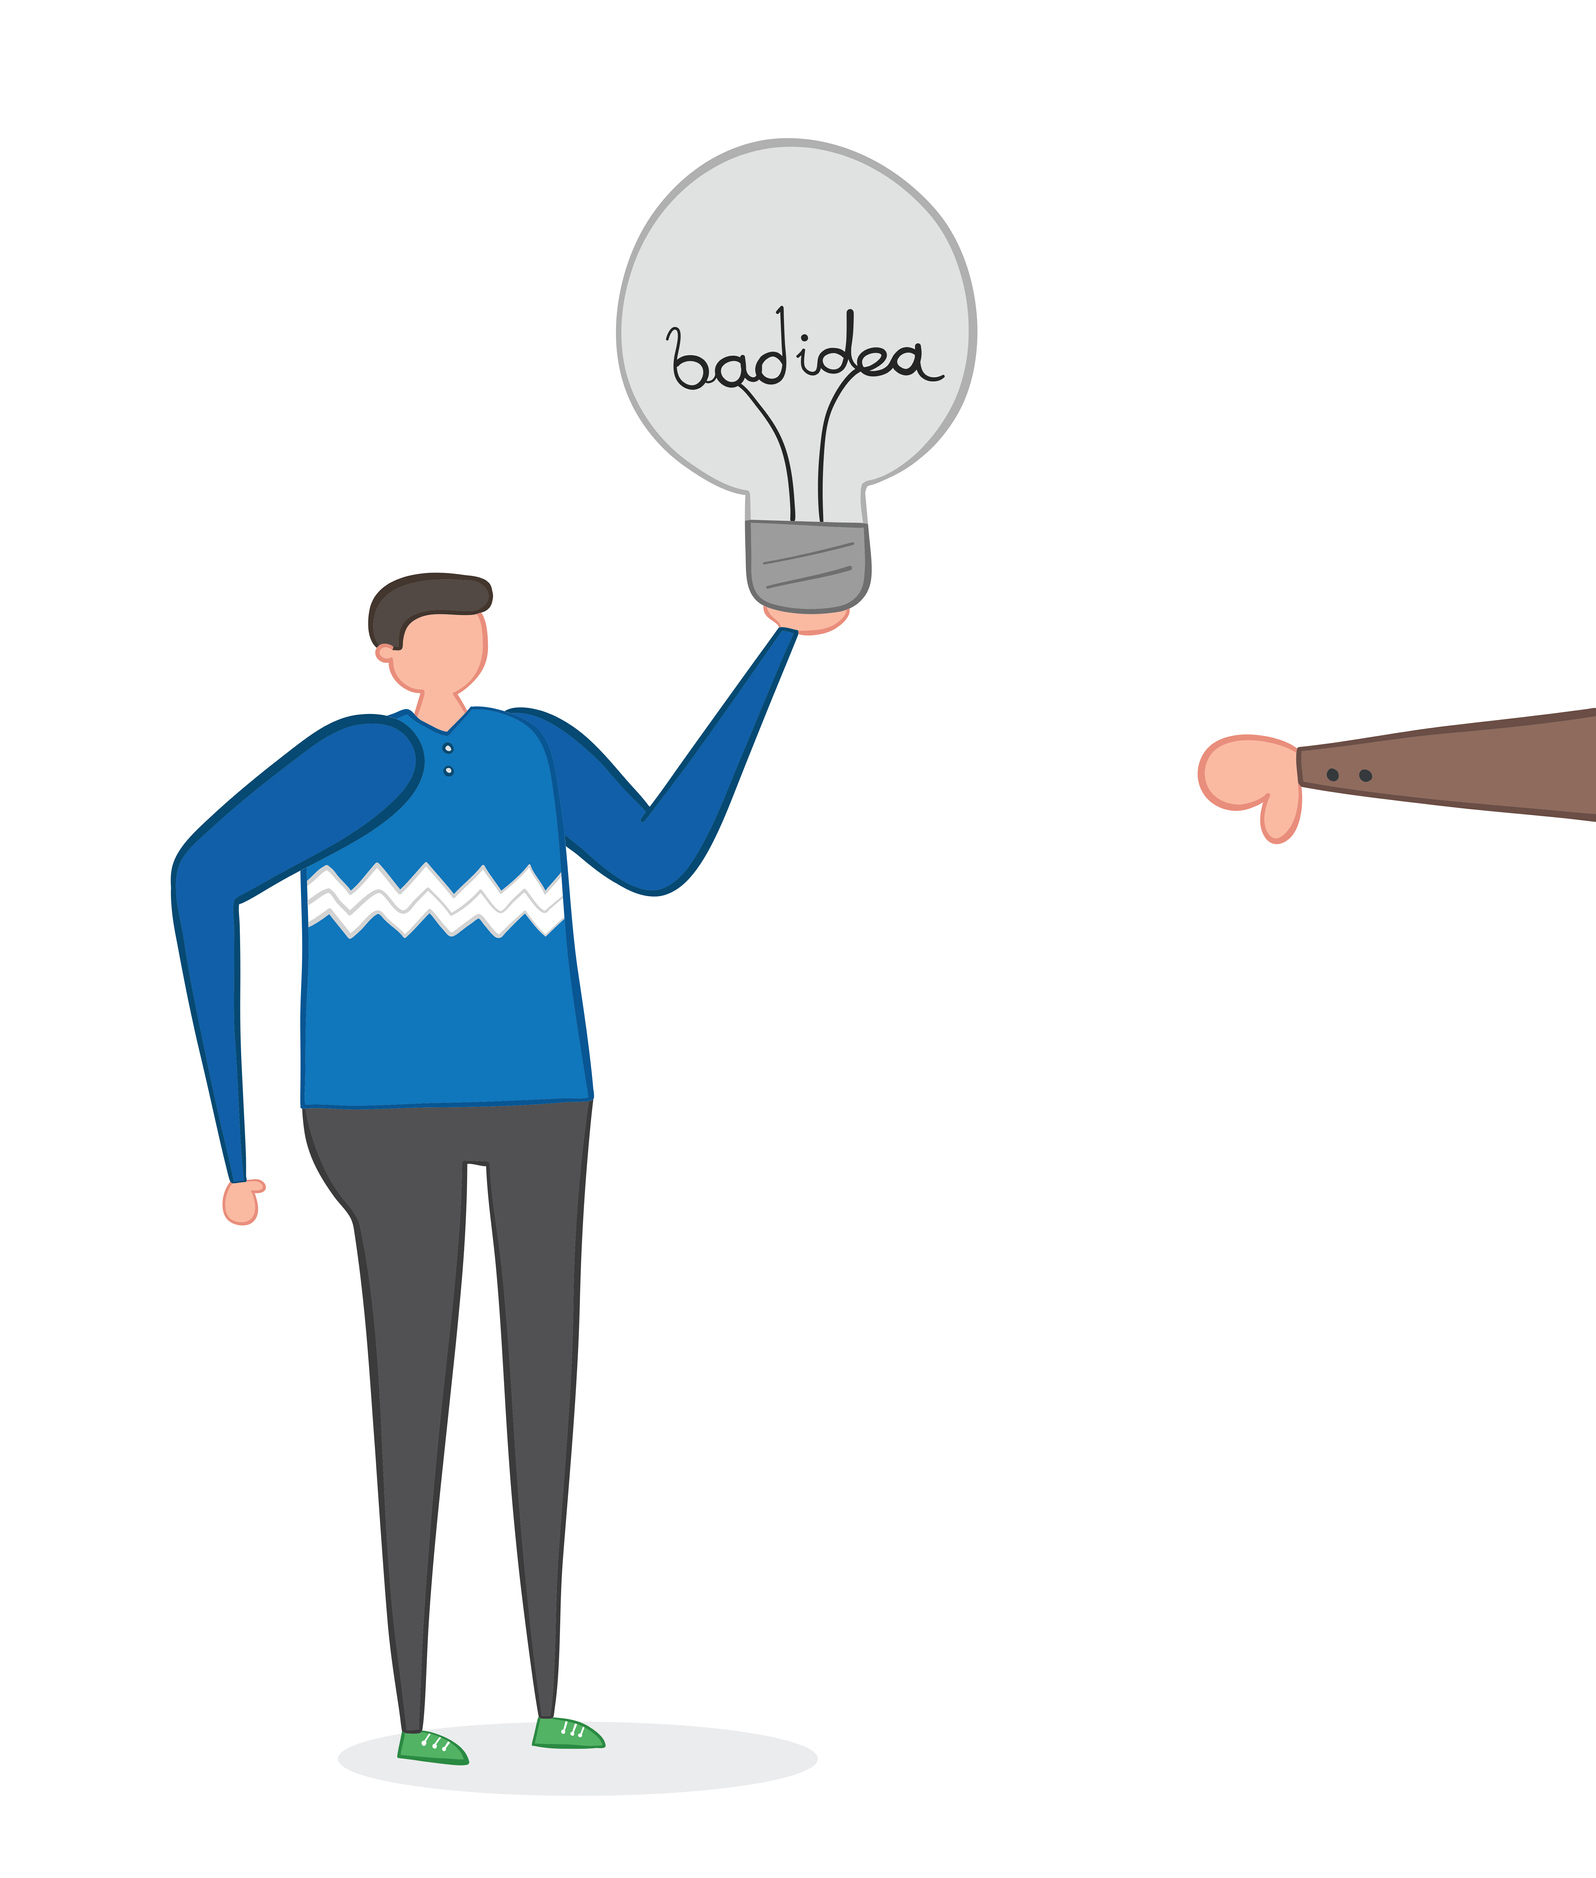 Man with bad idea light bulb and rejected with thumbs-down, hand-drawn vector illustration.